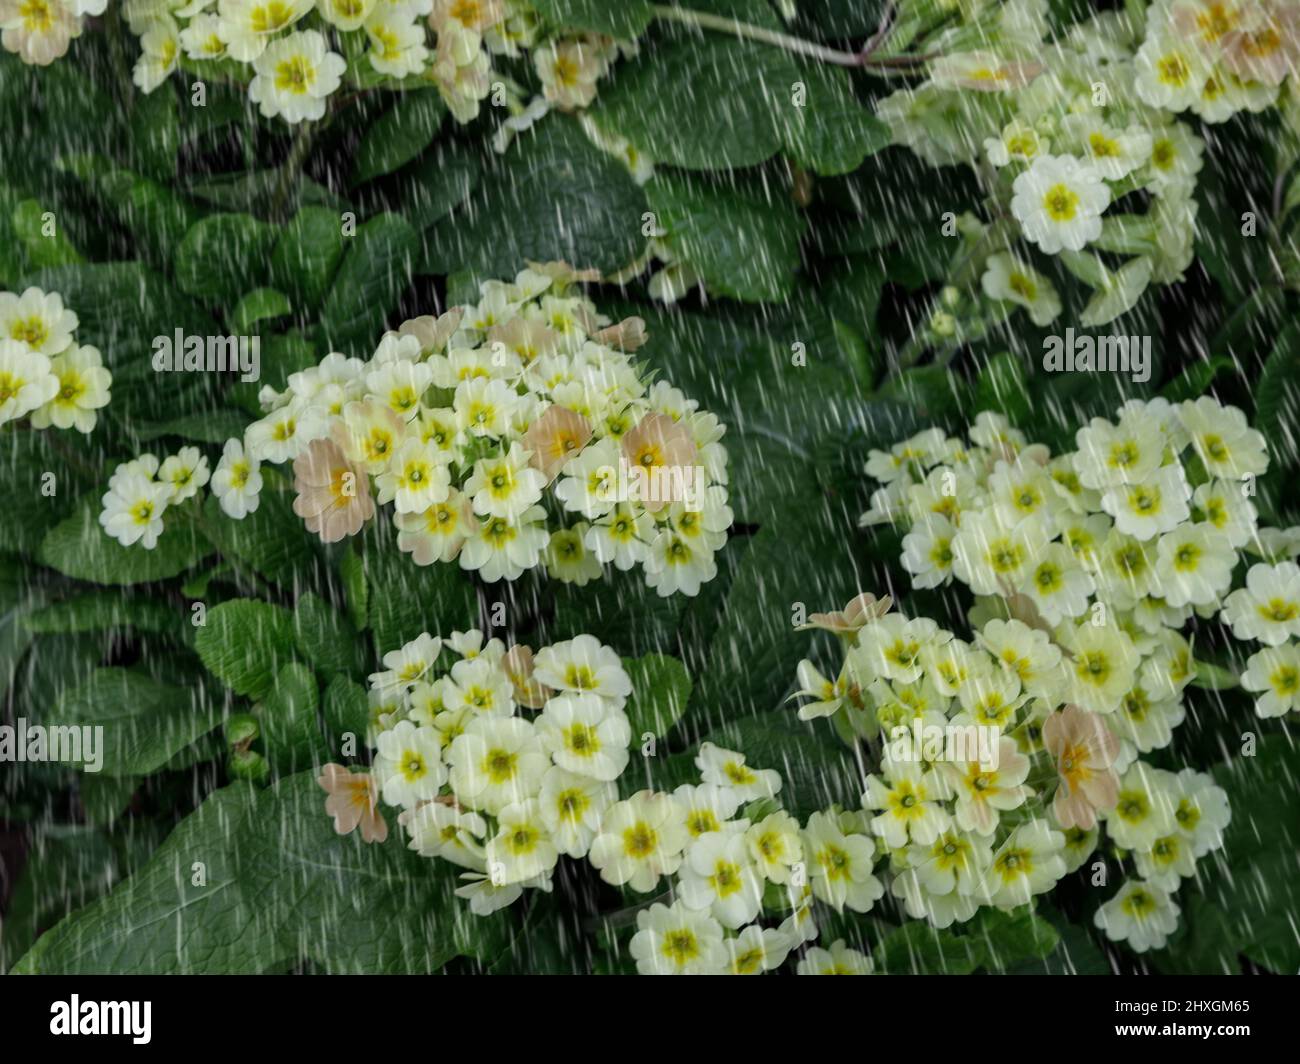 Primrose in spring rain. Dewy evening primroses in the flowerbed in the ornamental garden in a rainy day, nature and herb concept Stock Photo